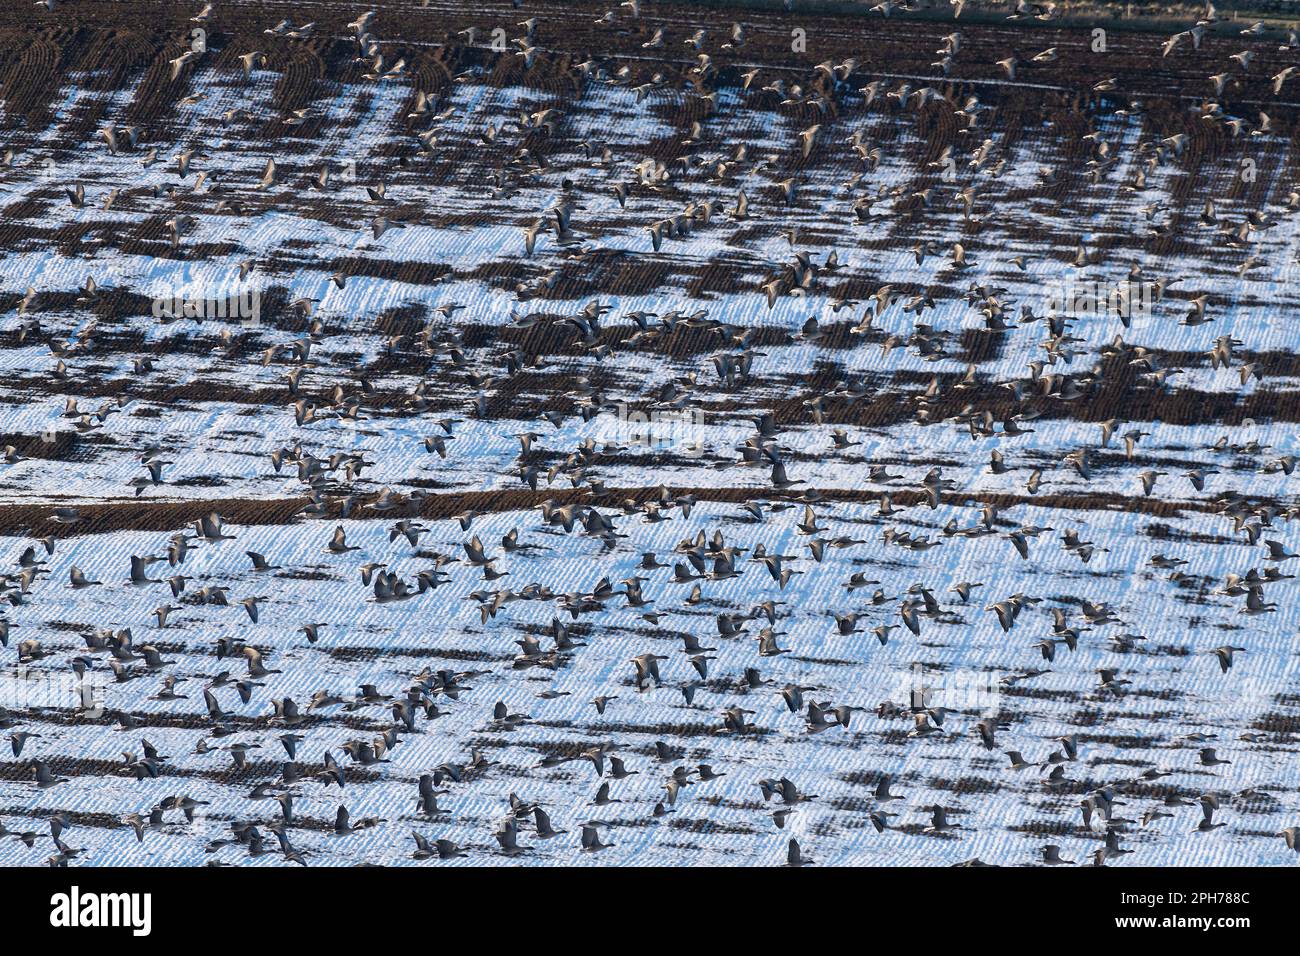 A Large Flock of Pink-footed Geese (Anser Brachyrhynchus) Flying Over a Snow-covered Ploughed Field in Late Afternoon Sunshine Stock Photo